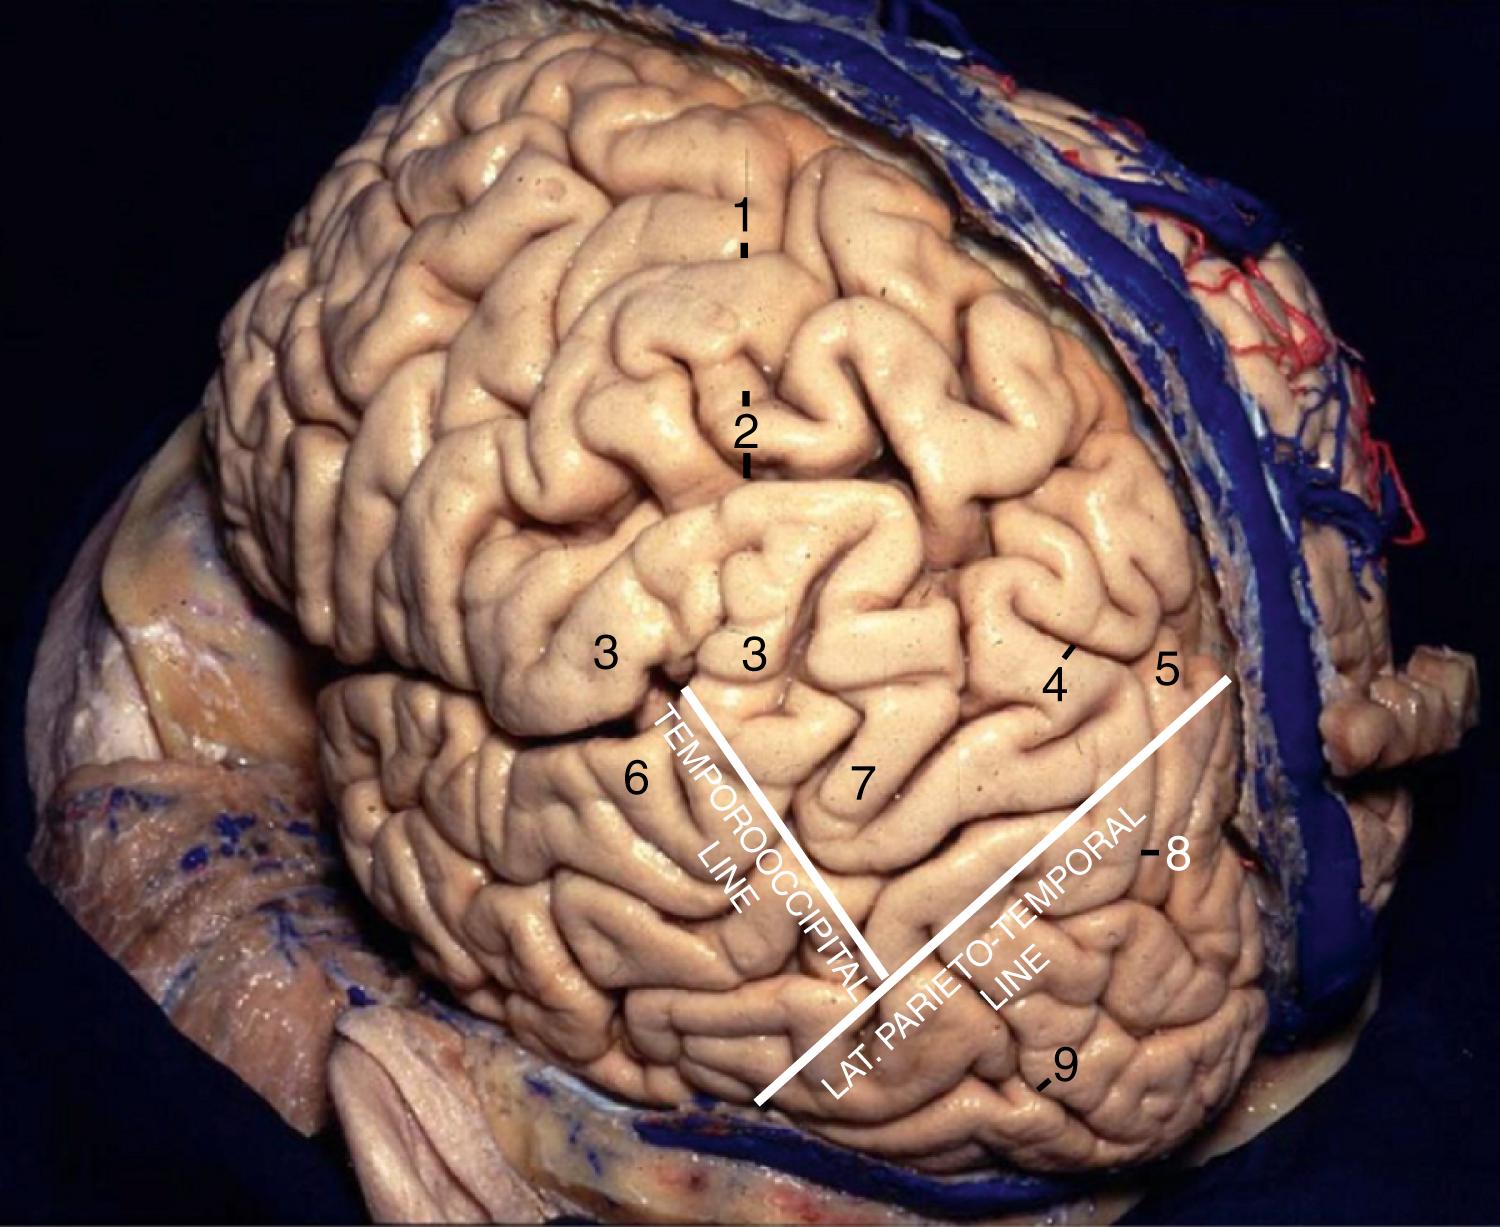 Figure 2.4, Posterolateral view of the left hemisphere. 1, Central sulcus; 2, postcentral gyrus and sulcus; 3, supramarginal gyrus; 4, intraparietal sulcus; 5, superior parietal lobule; 6, superior temporal gyrus; 7, angular gyrus; 8, intraoccipital sulcus (continuation of intraparietal sulcus); 9, lateral occipital sulcus.